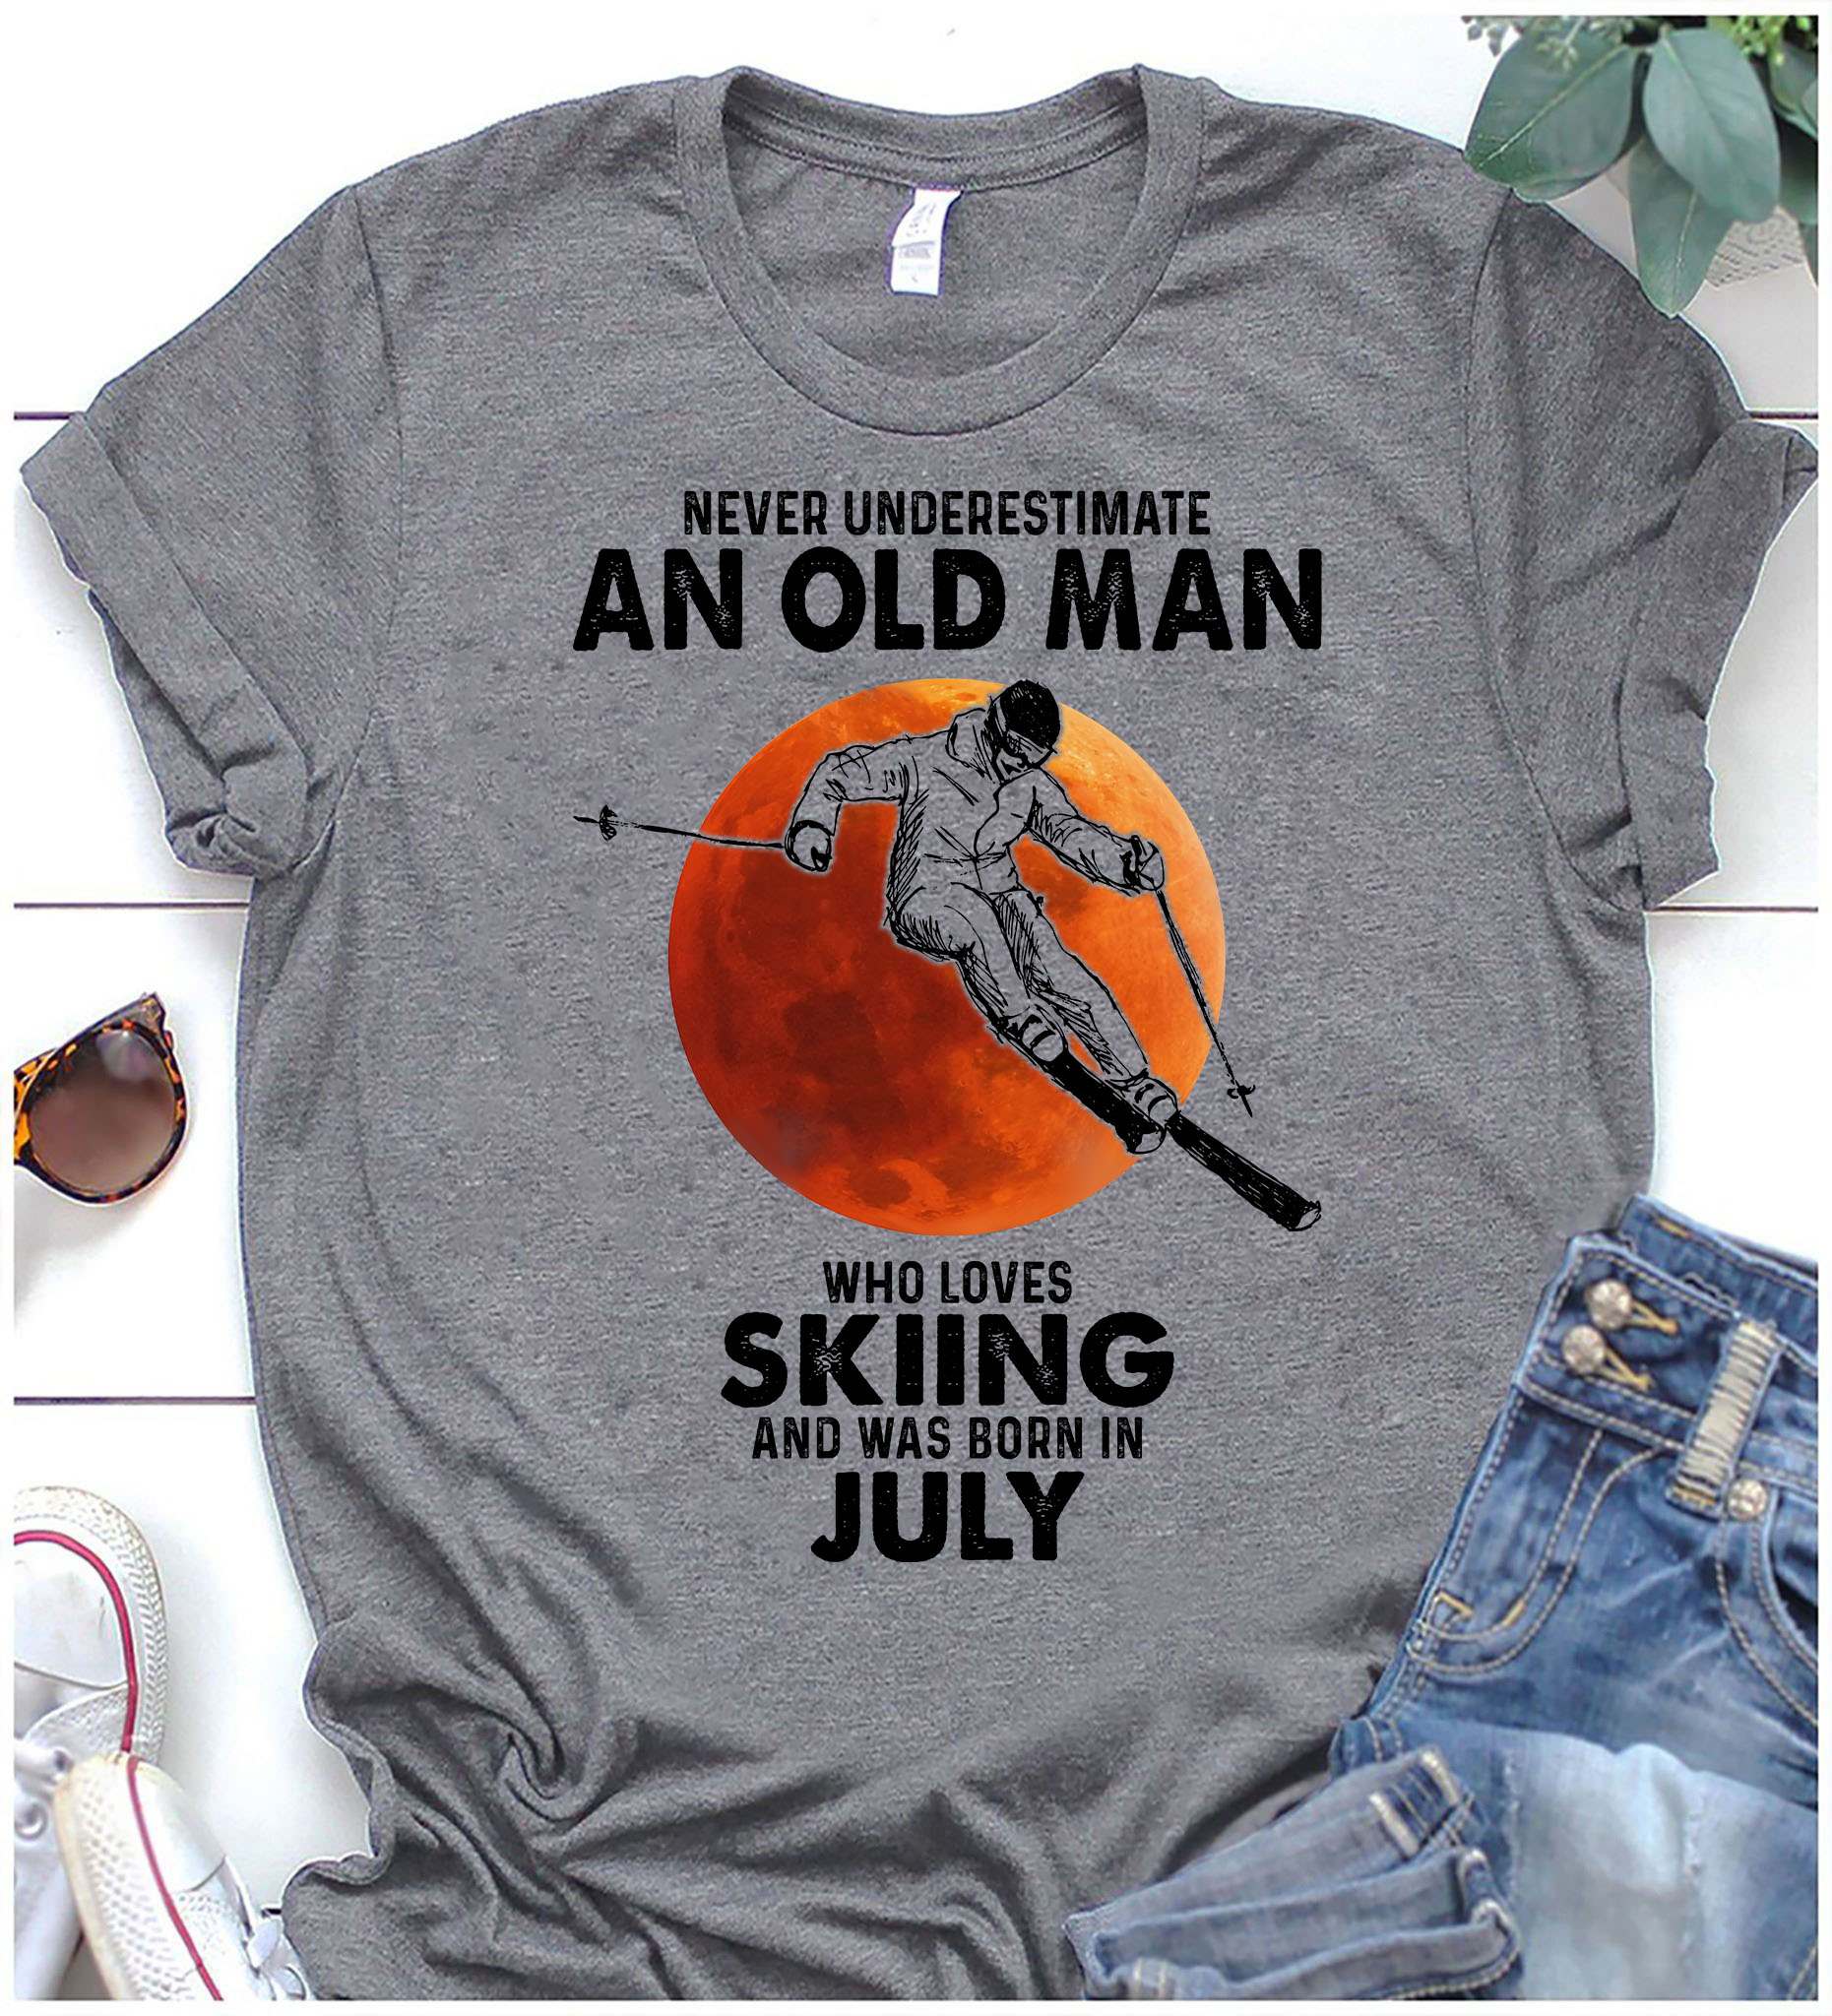 Man Skiing, July Birthday Man - Never underestimate an old man who loves skiing and was born in july